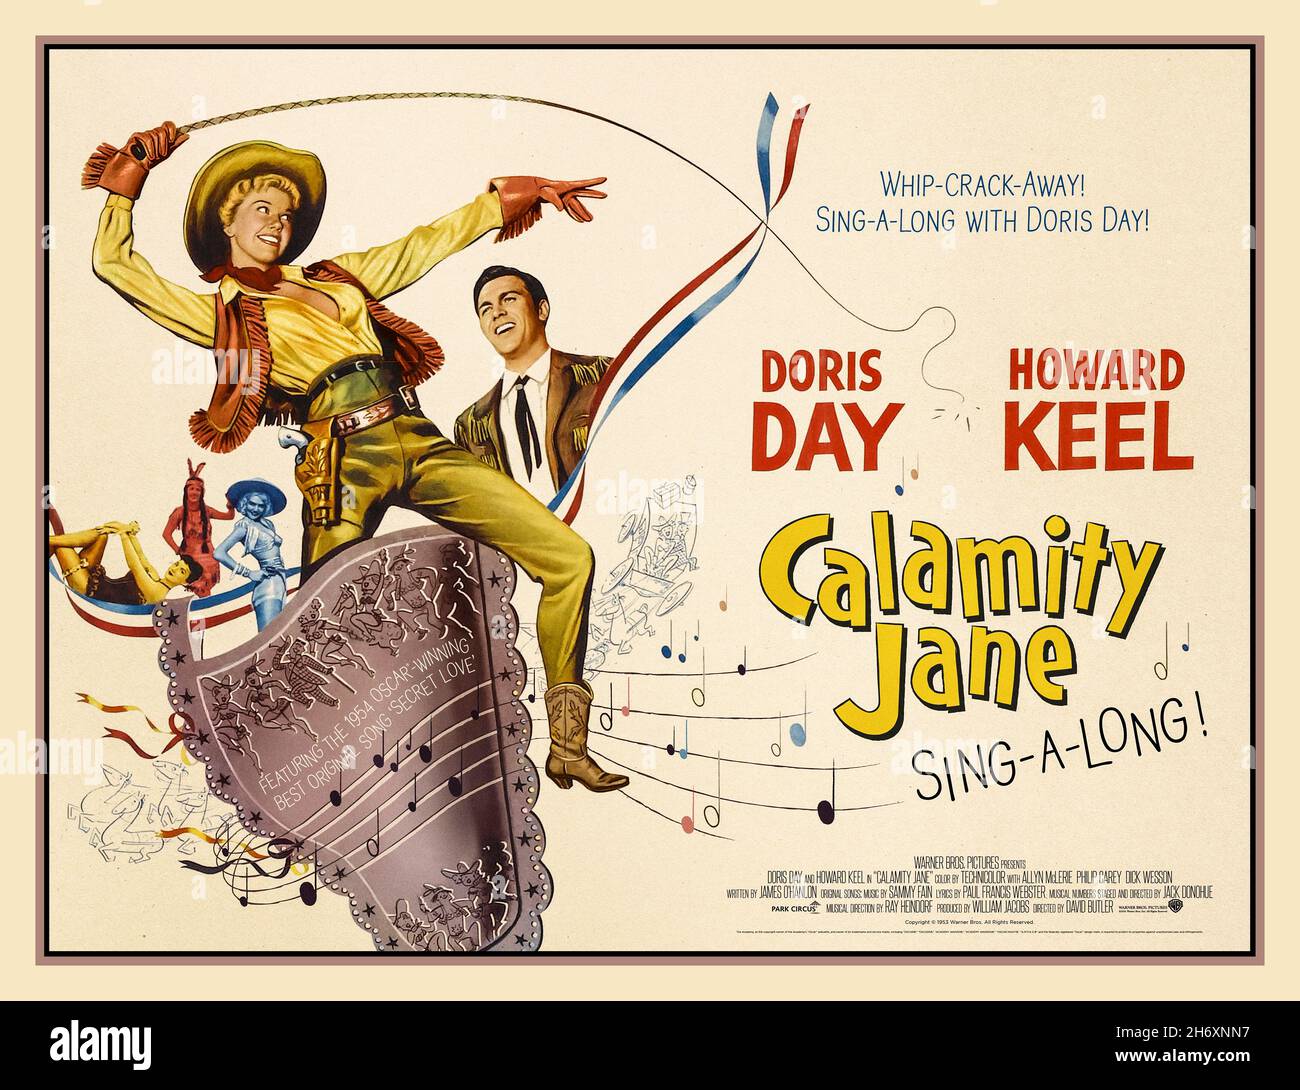 Calamity Jane, vintage movie film poster 1953 American Technicolor Western musical film directed by David Butler and starring Doris Day and Howard Keel. The musical numbers were staged and directed by Jack Donohue . The film is loosely based on the life of Wild West heroine Calamity Jane (Doris Day) and explores an alleged romance between her and Wild Bill Hickok (Howard Keel). It was devised by Warner Bros. in response to the success of Annie Get Your Gun and was Oscar-nominated for Scoring of a Musical Picture and Best Sound. Stock Photo